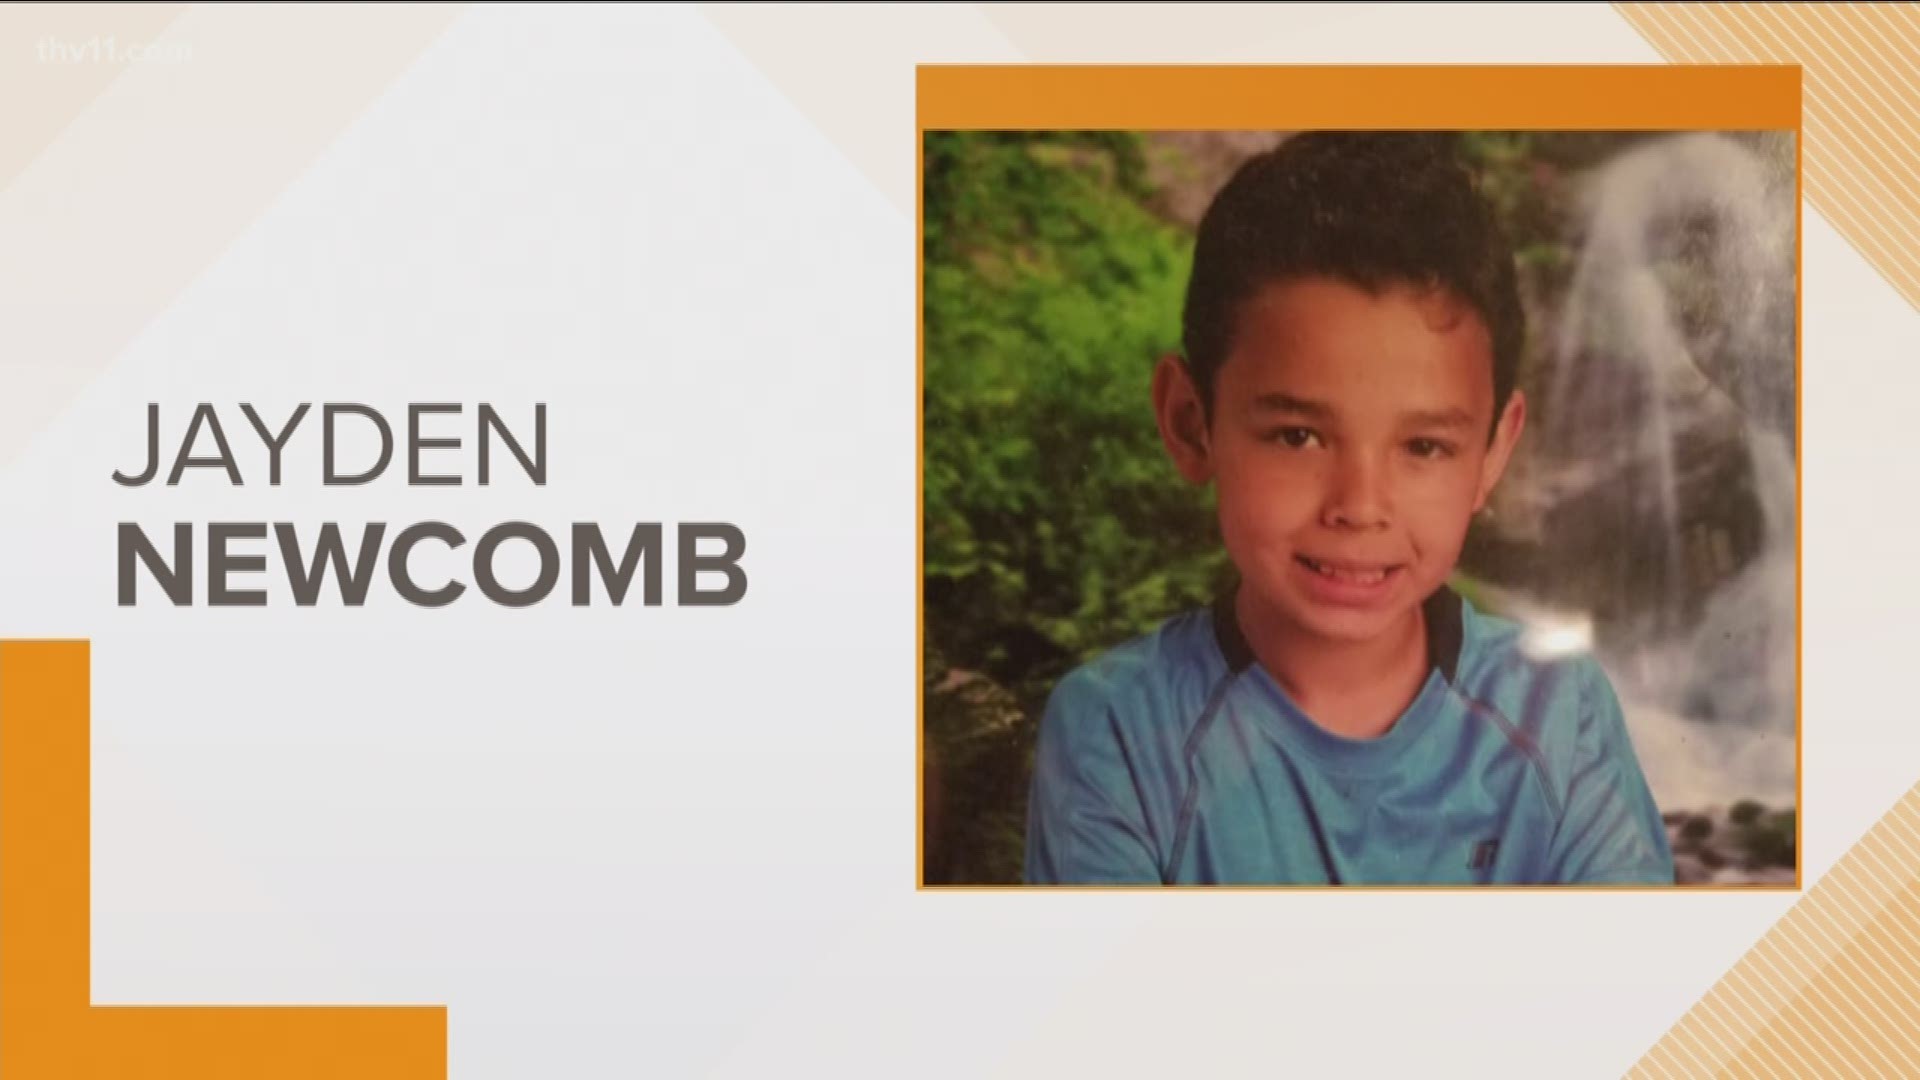 Jayden Newcomb was last seen at approximately 10:45 p.m. Wednesday in the area of Alvie Lane in Garland County.